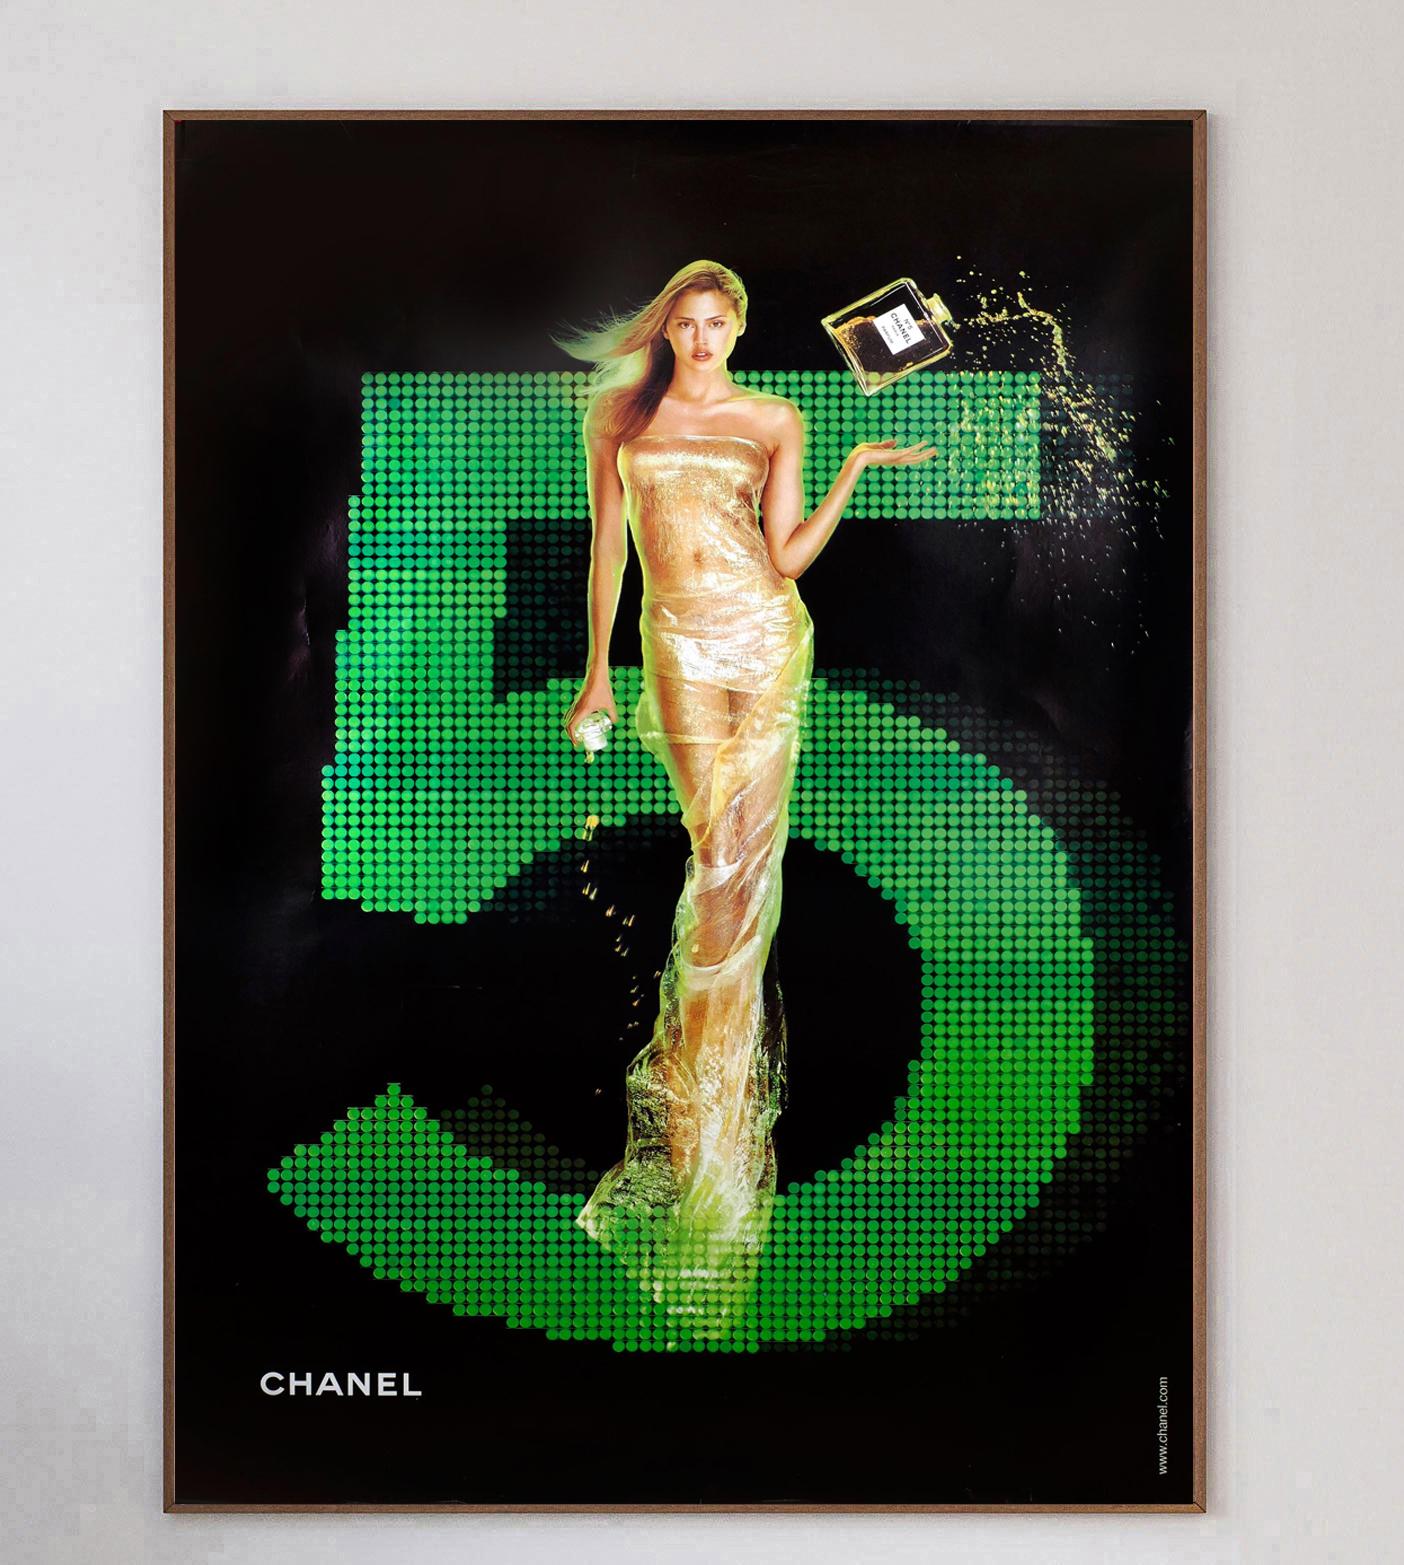 Extra-large poster promoting the iconic Chanel No.5 fragrance. The fragrance was first released in 1921 and continues to be one of the most popular in the world today. This stunning poster features model and actress Estella Warren and was styled &